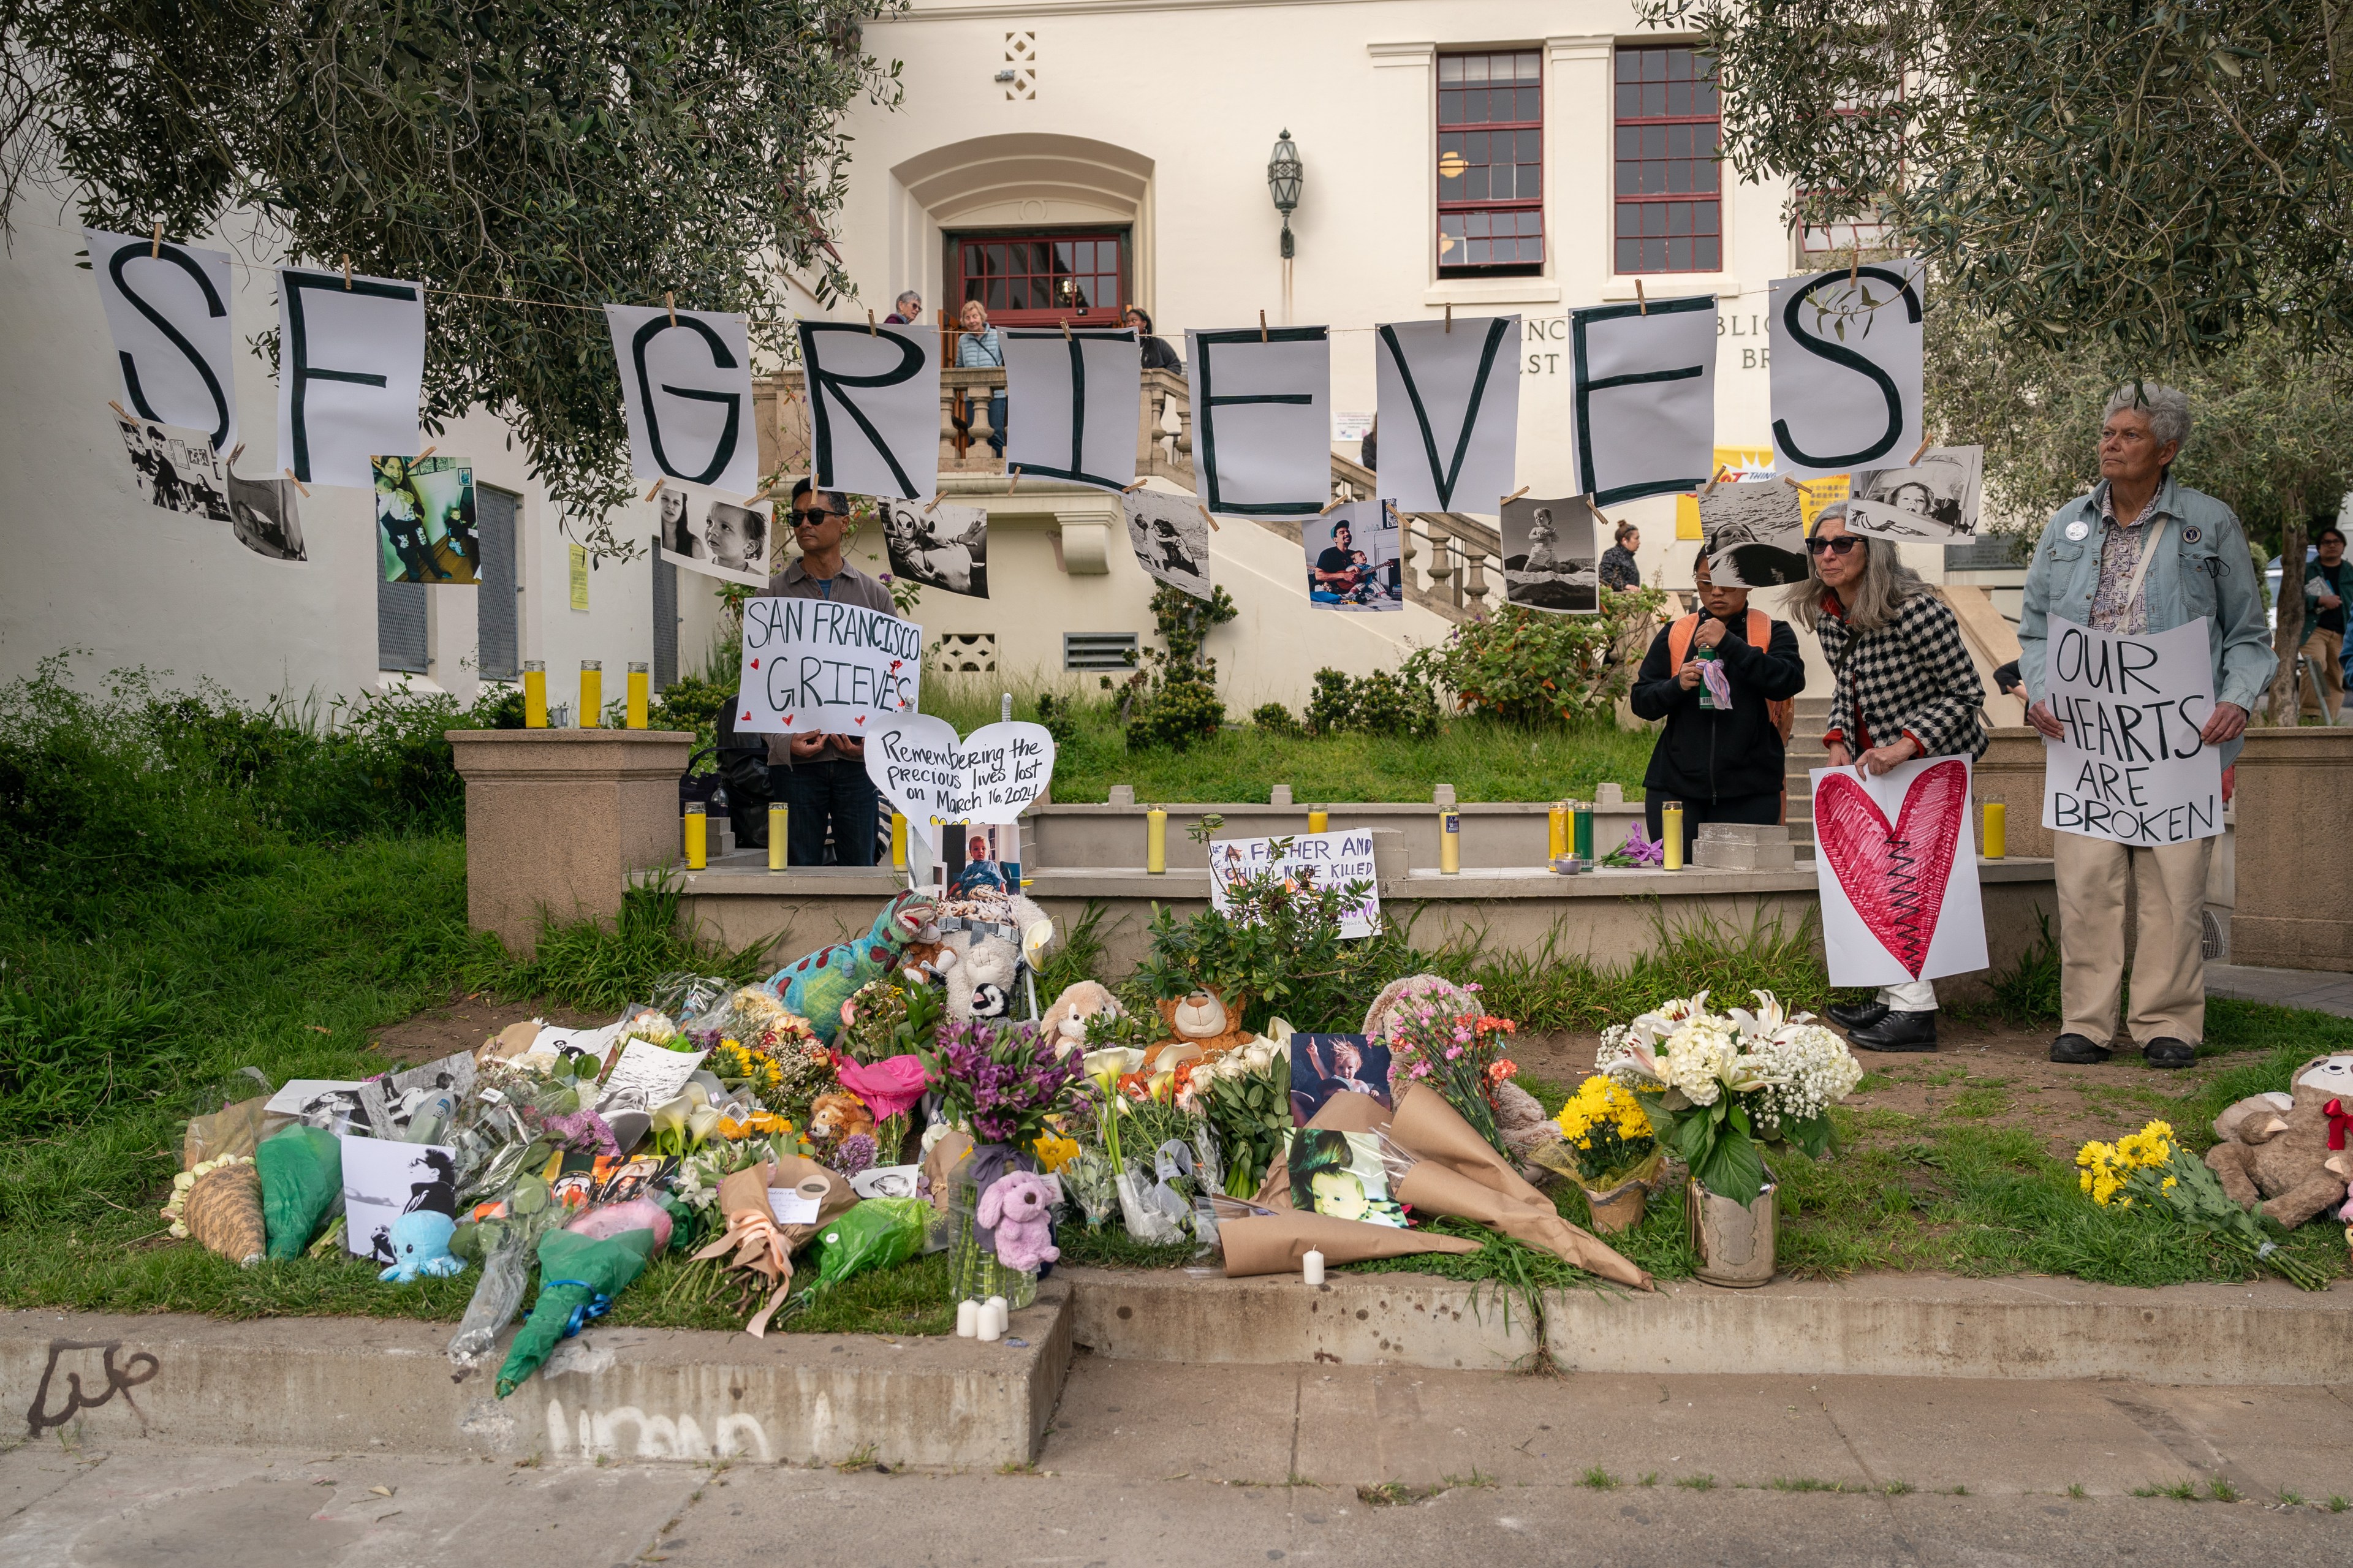 A vigil with flowers, candles, signs saying &quot;SAN FRANCISCO GRIEVES&quot; and &quot;OUR HEARTS ARE BROKEN,&quot; in front of a building.